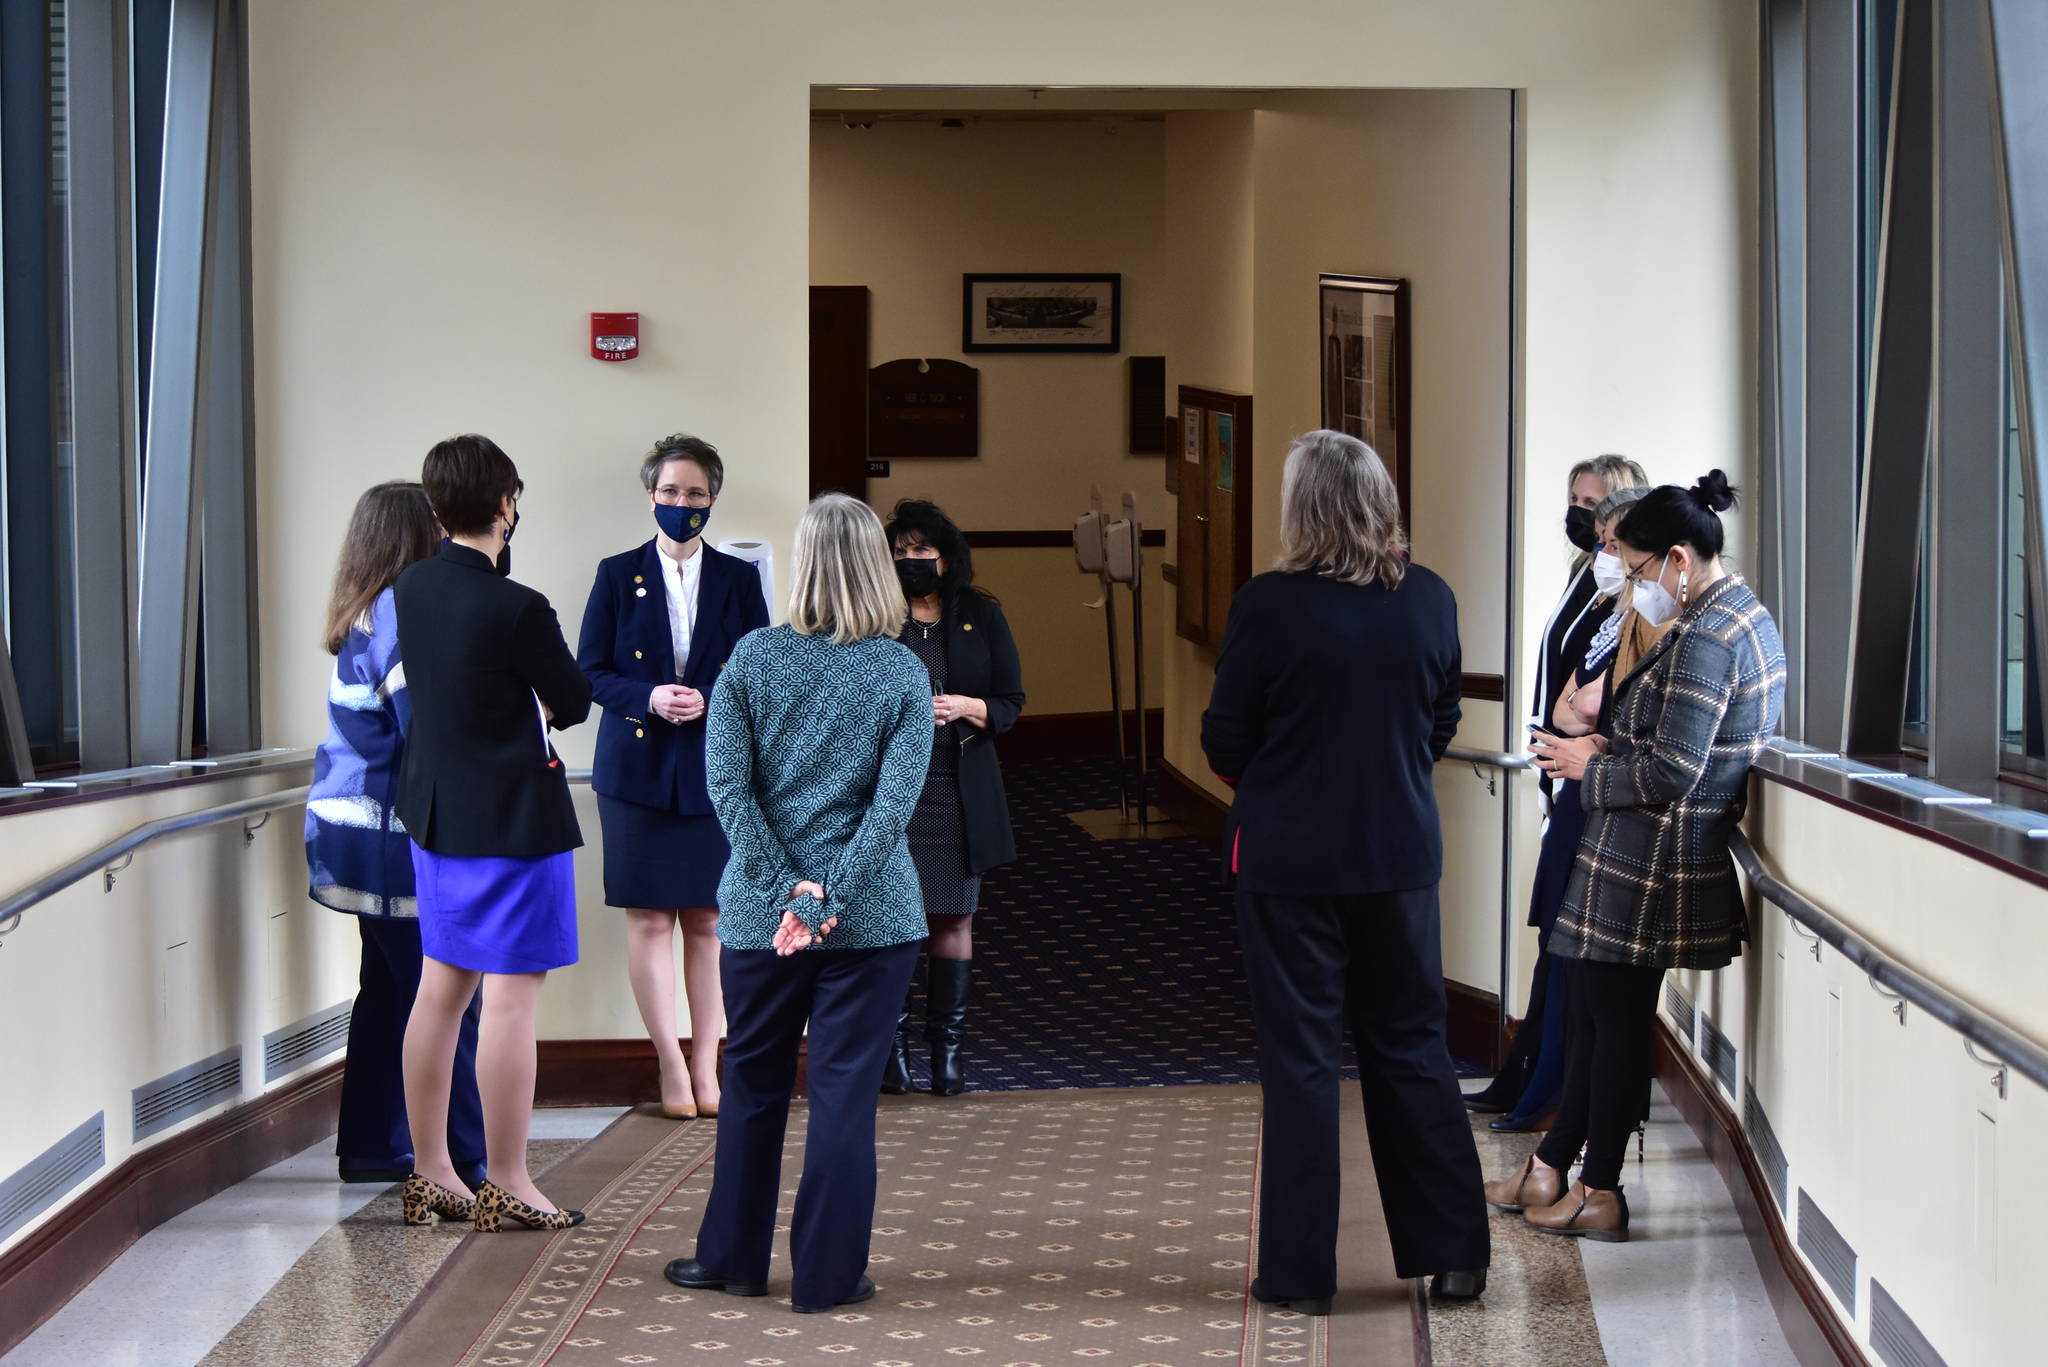 Women members of the Alaska House of Representatives from both parties meet in the hallway of the capitol Wednesday, March 3, 2021, to discuss a vote to condemn Rep. Zack Fields, D-Anchorage, for sexists comments he made on the floor the previous week. (Peter Segall / Juneau Empire)